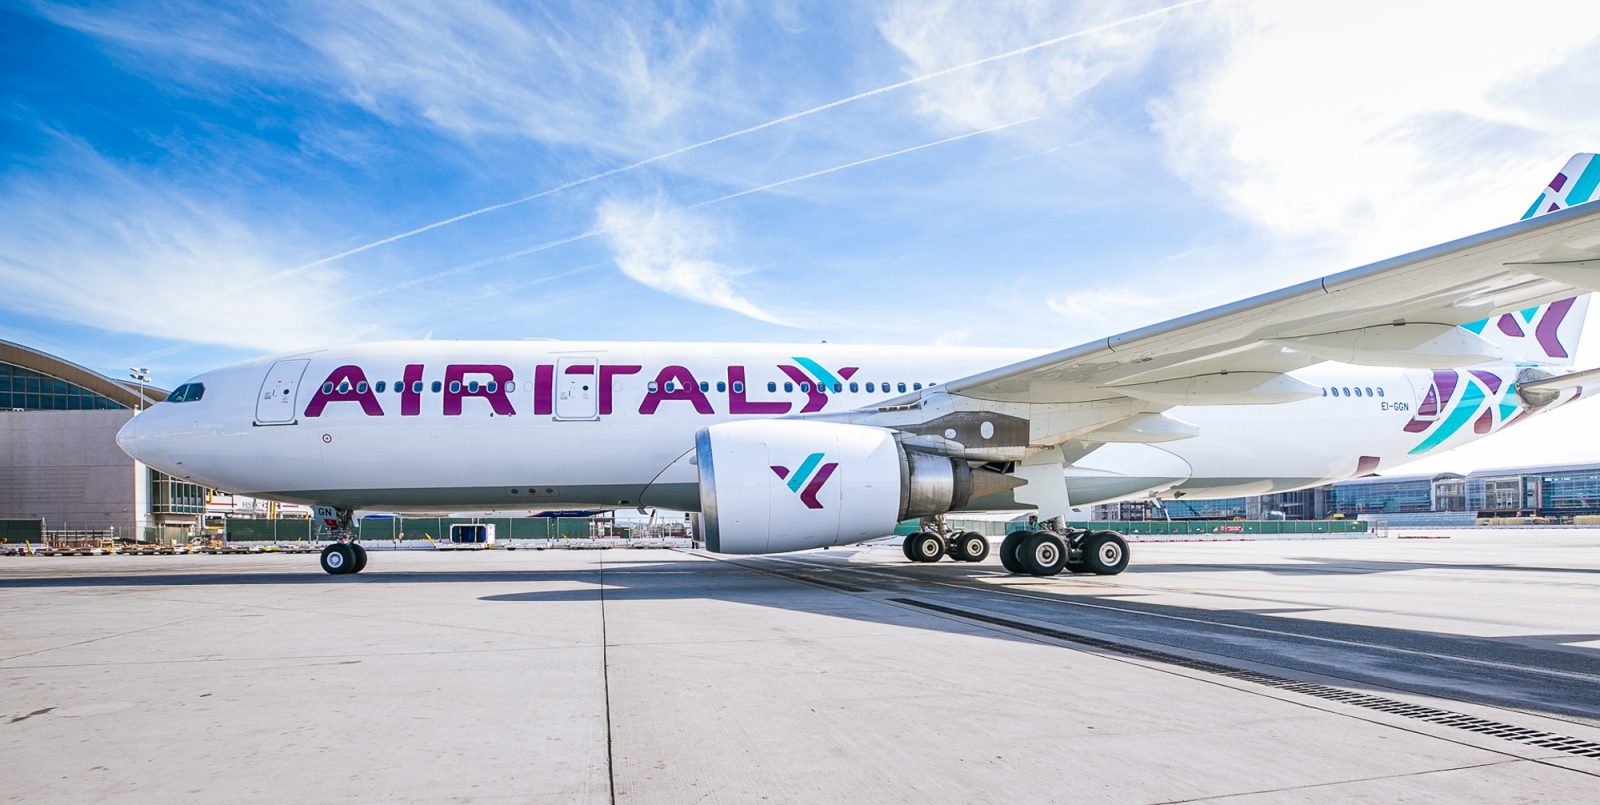 Confusion Over Air Italy's Schedules Raise Important Questions About the State of the Airline